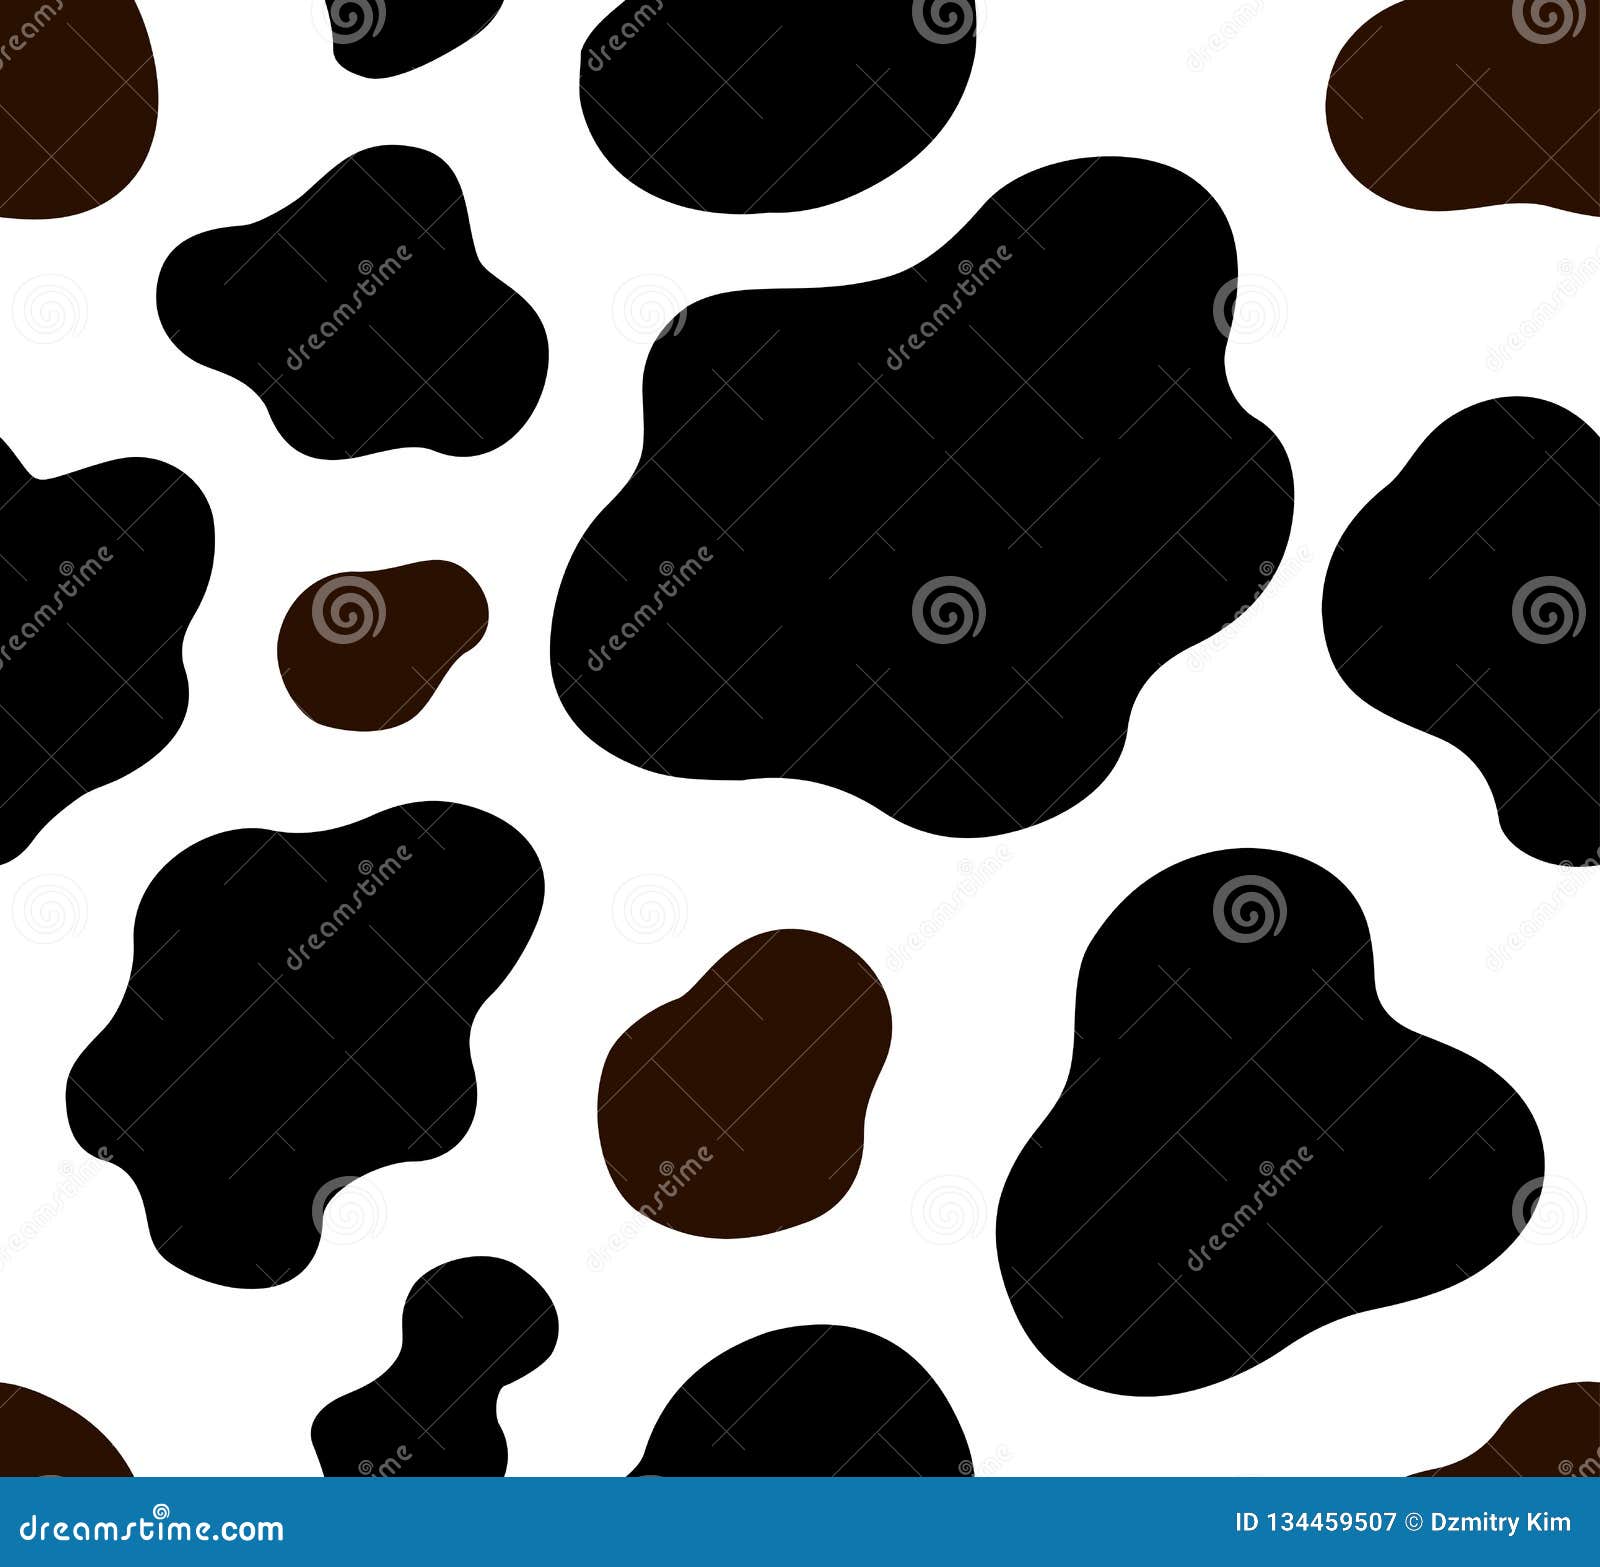 cow texture pattern repeated seamless brown black and white lactic chocolate animal jungle print spot skin fur milk day